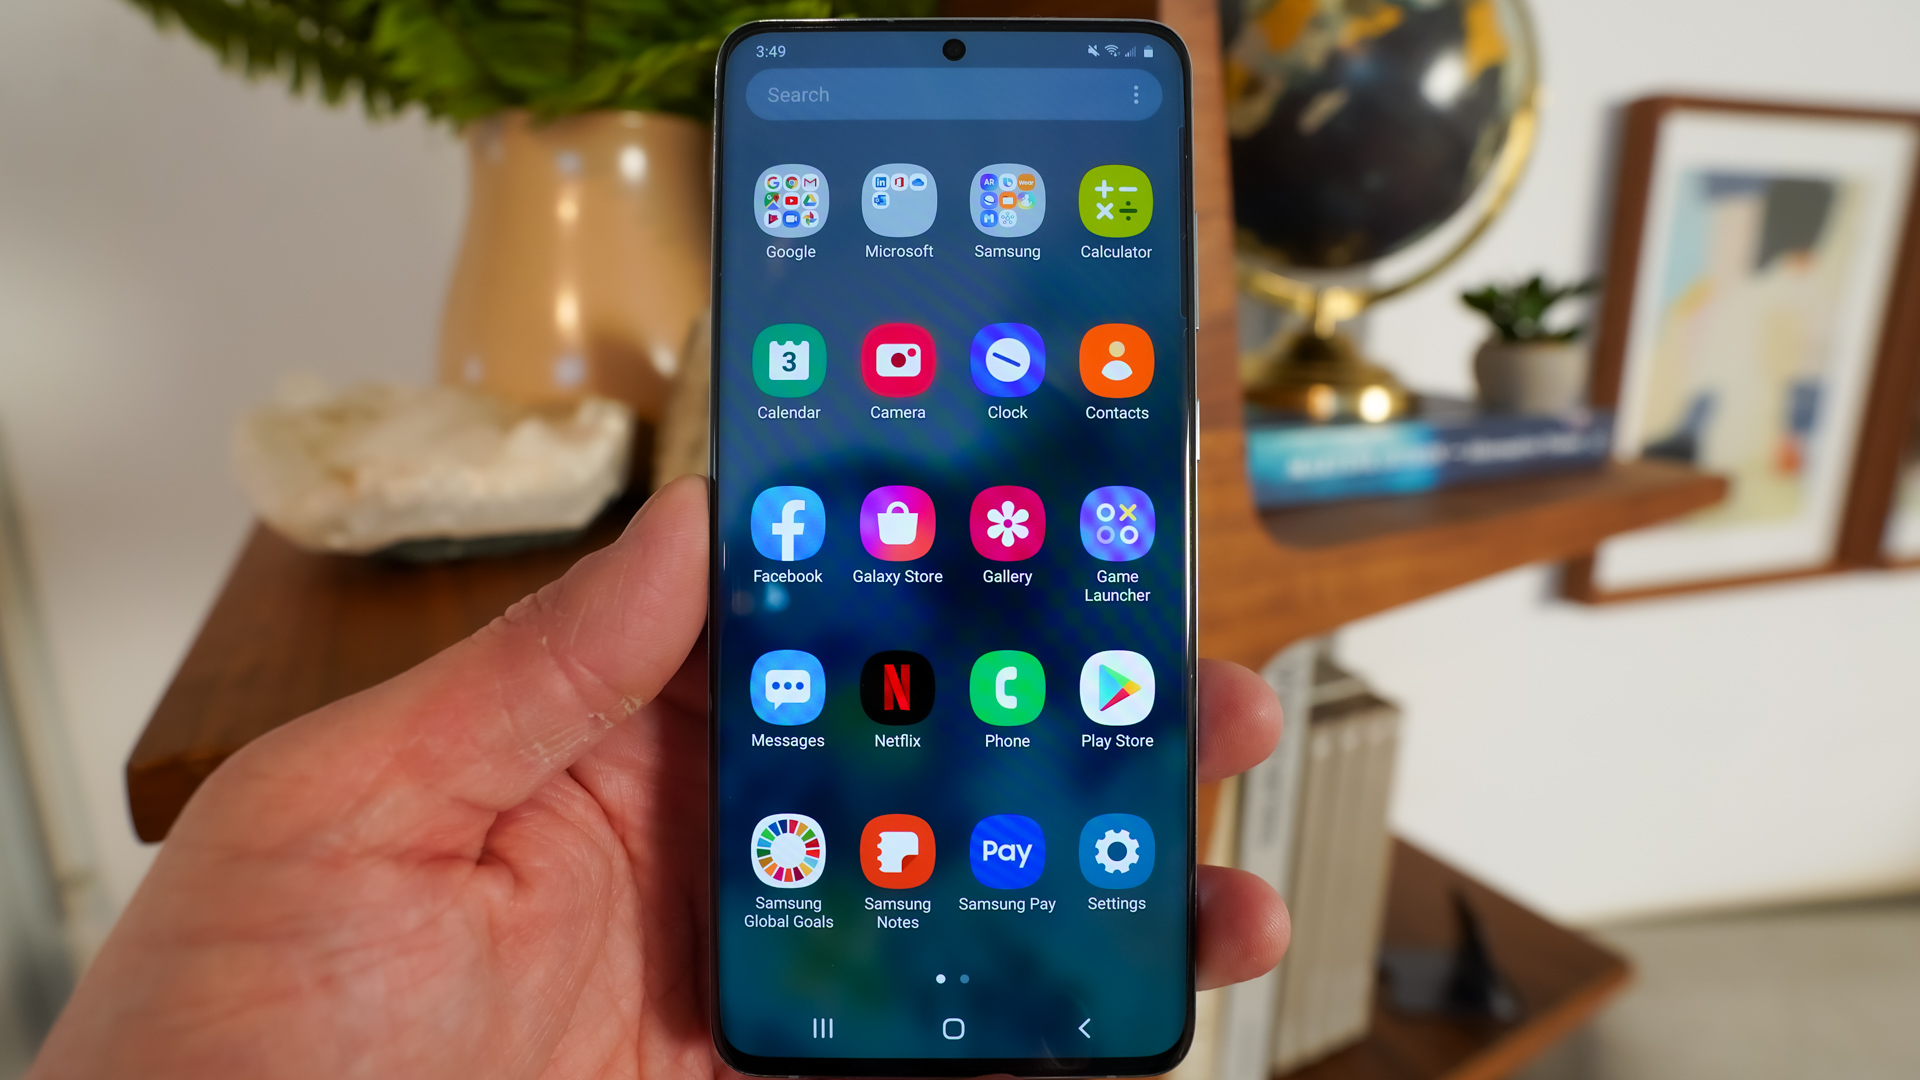 Samsung Galaxy S20 Android 10 One UI 2